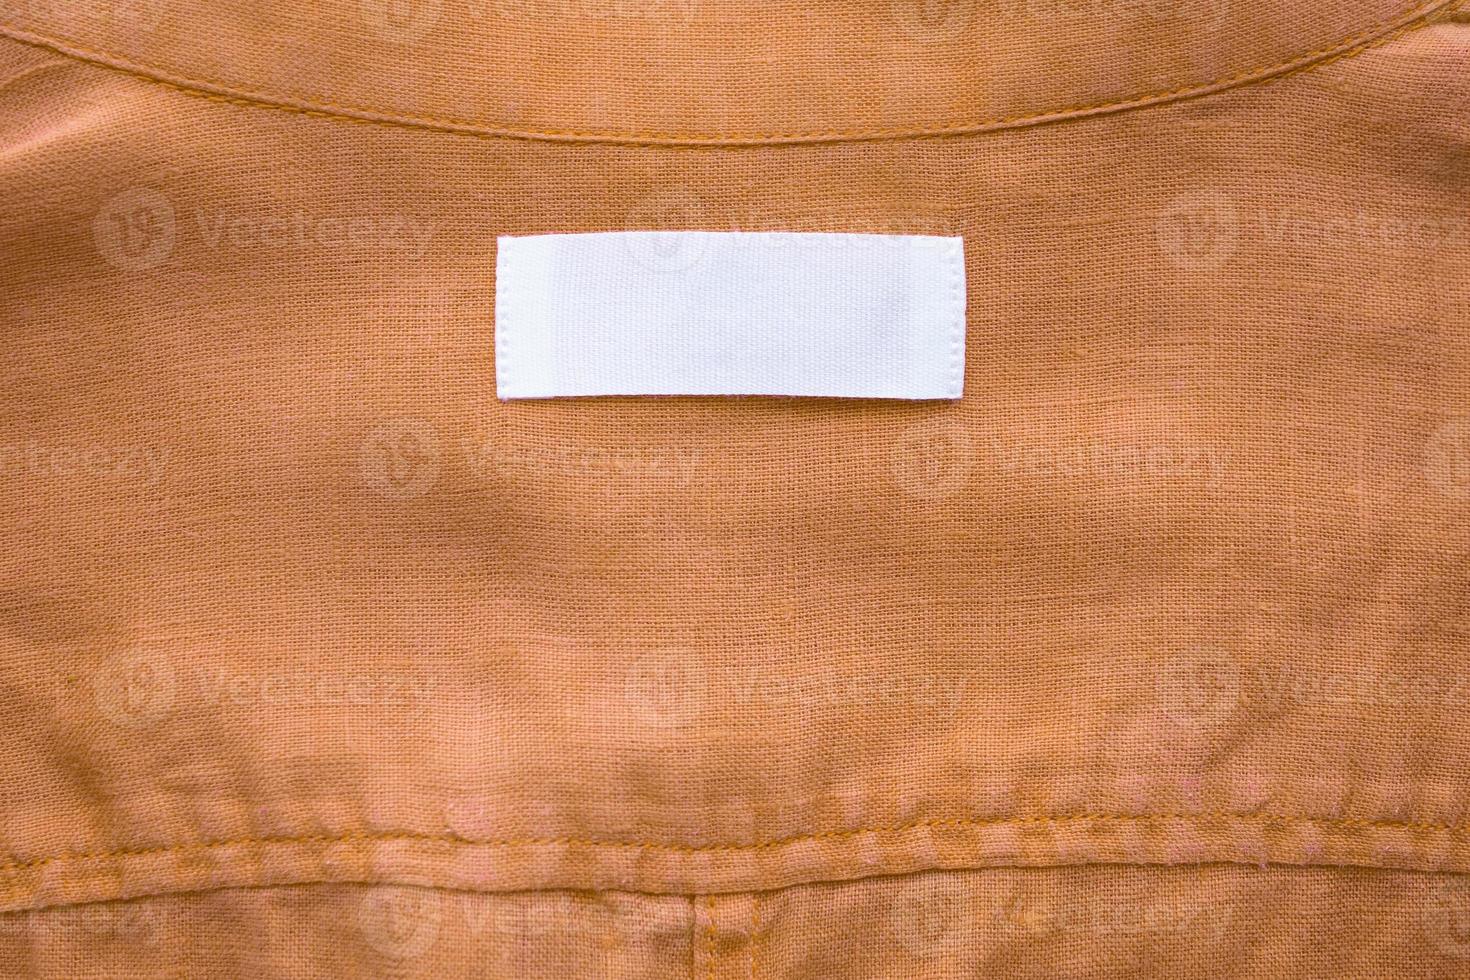 White blank clothing tag label on brown linen shirt fabric texture background photo